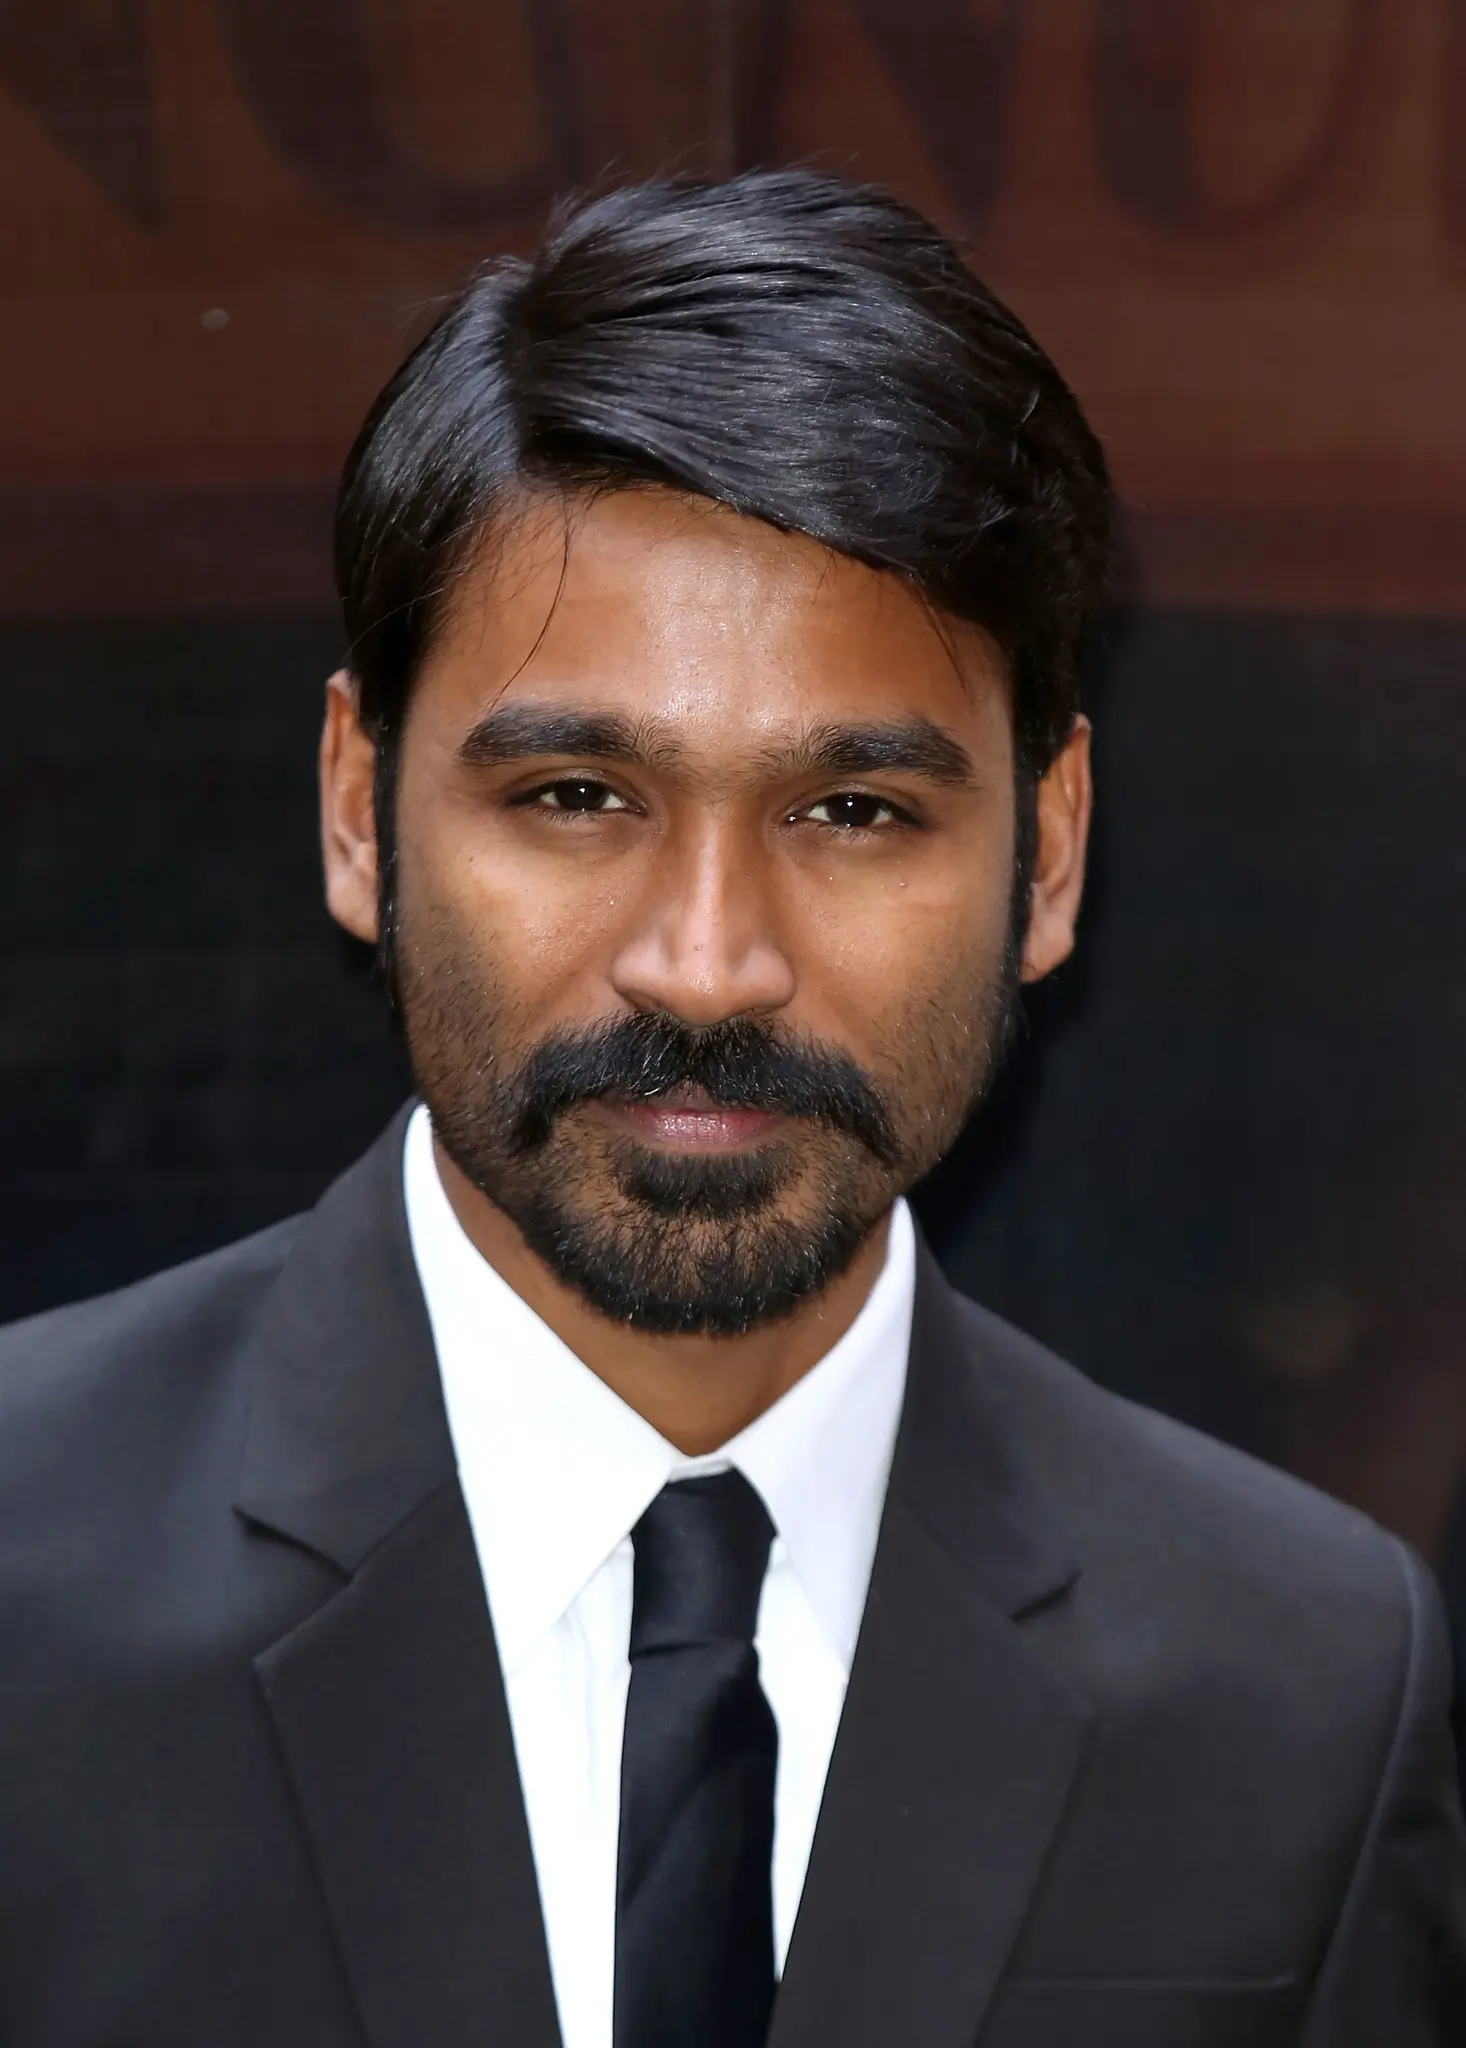 Dhanush Height Weight Age Body Statistics Biography